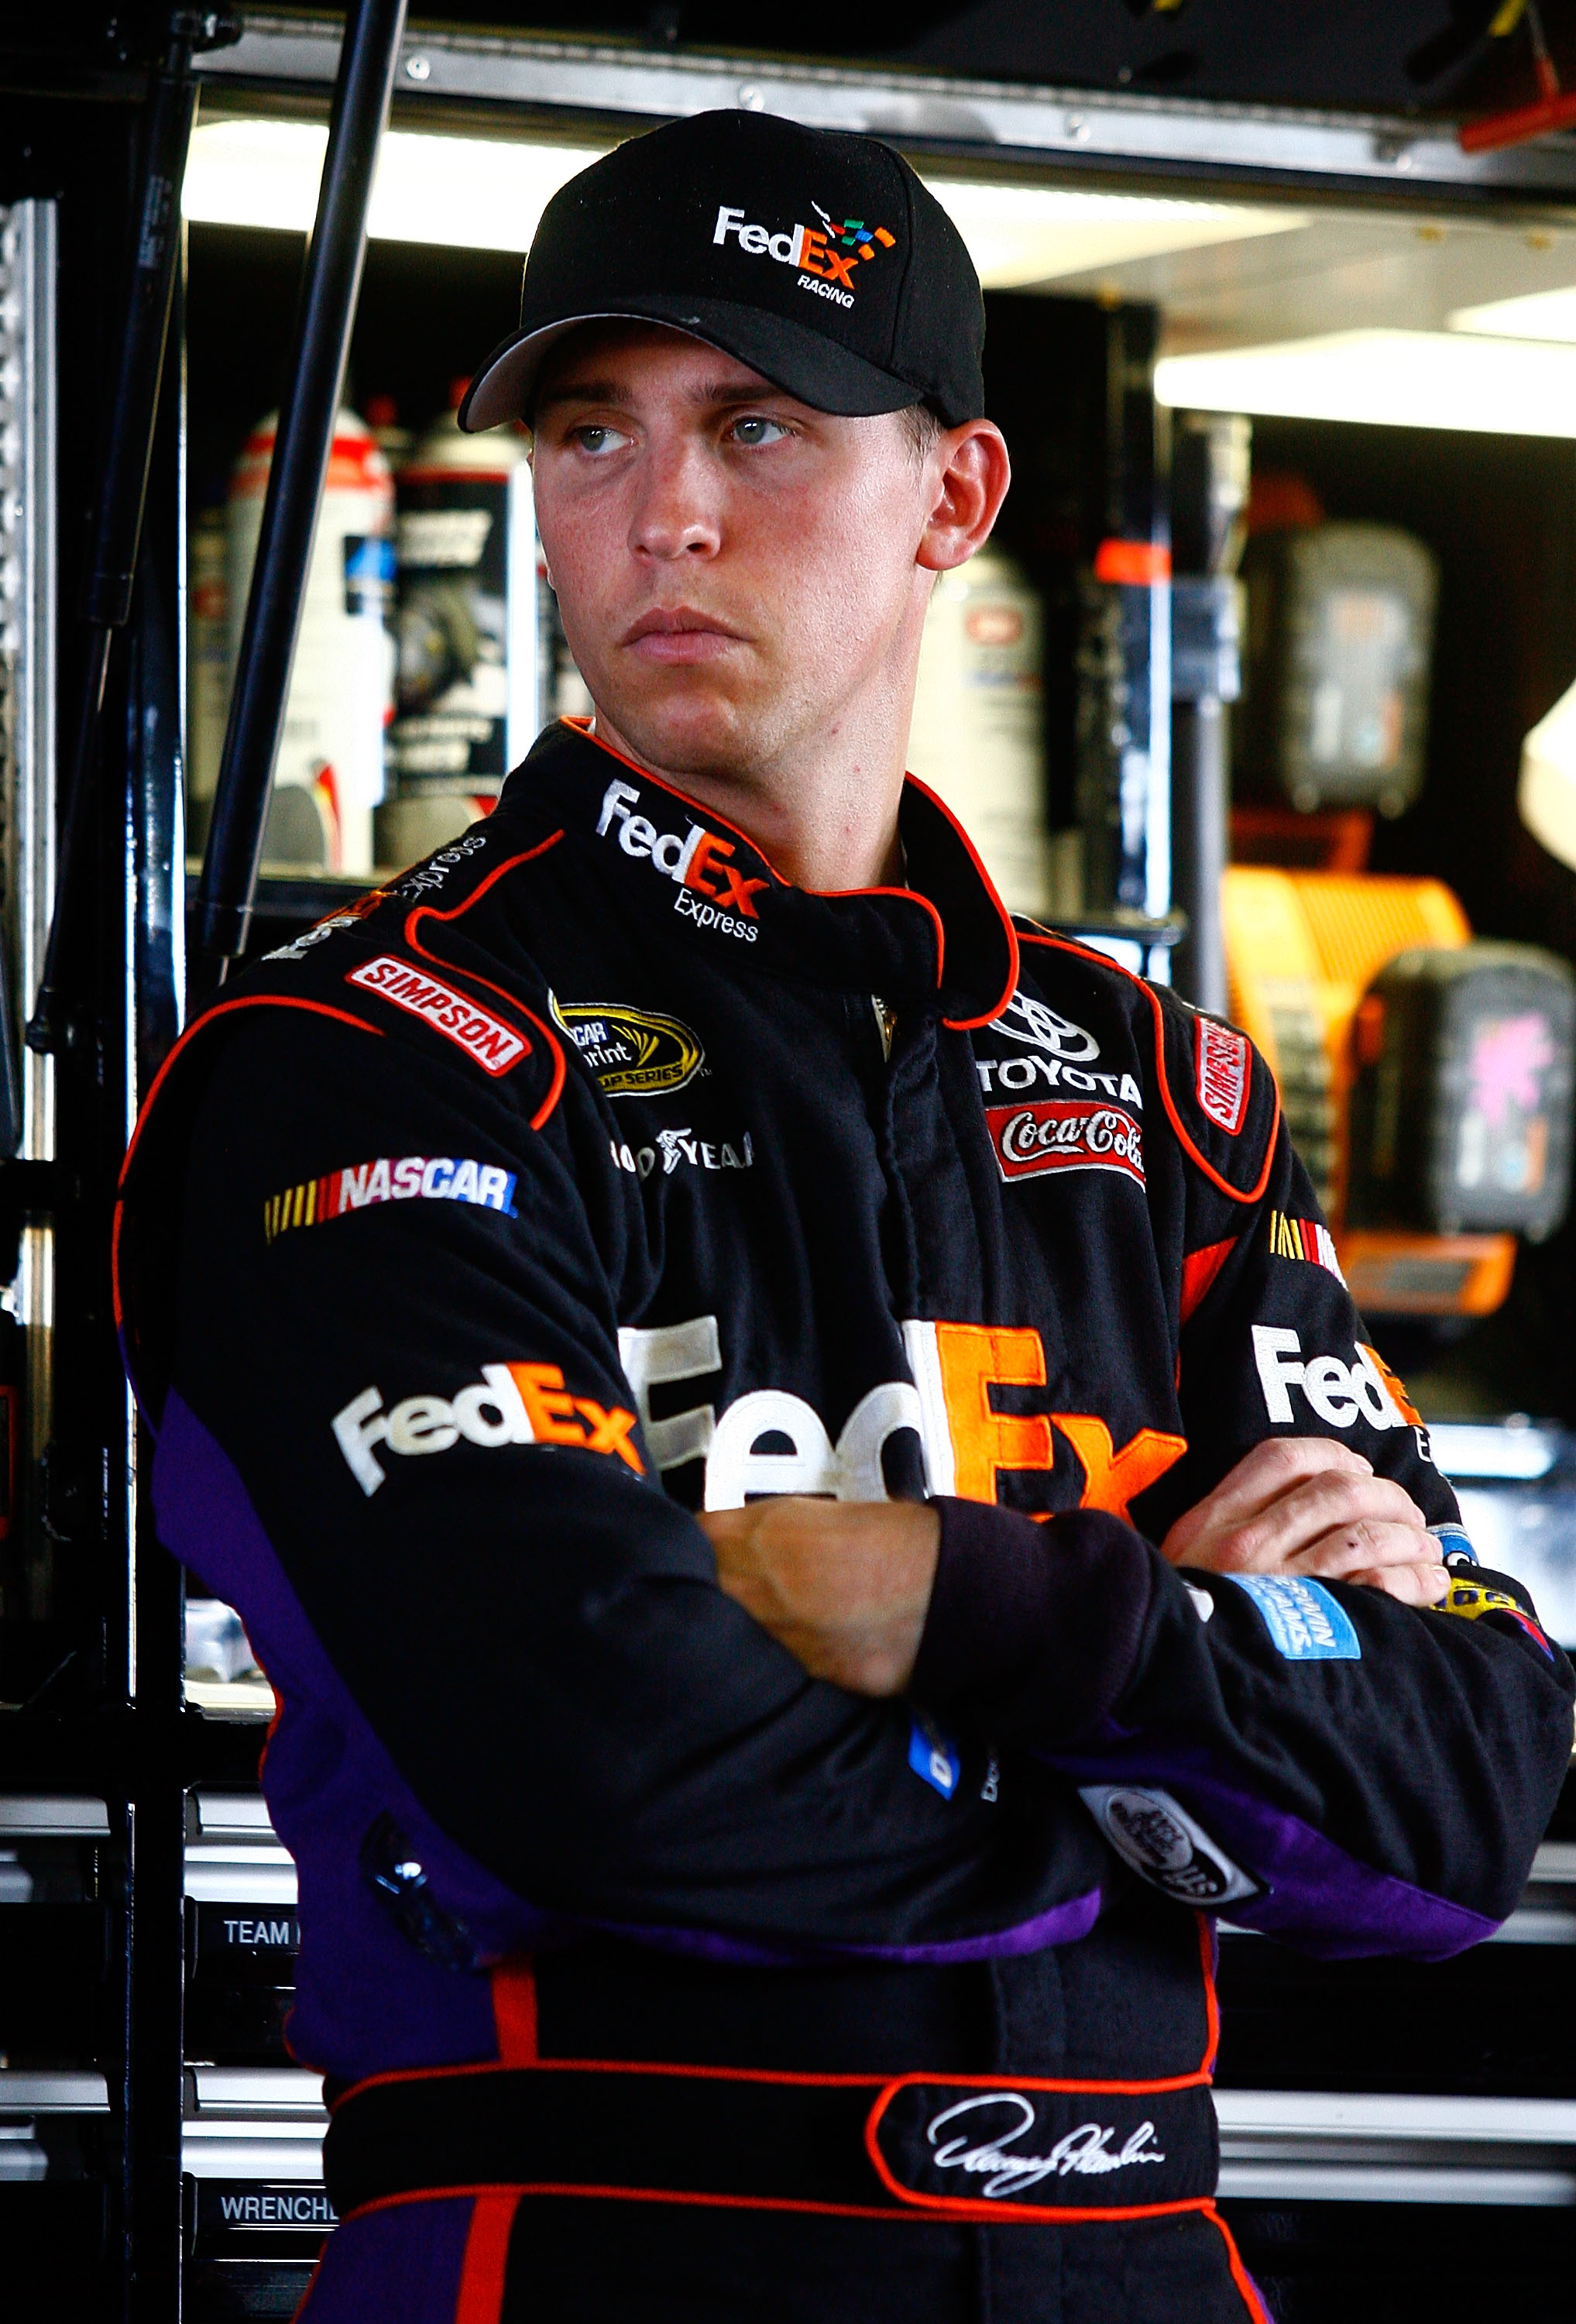 HOMESTEAD, FL - NOVEMBER 19:  Denny Hamlin, driver of the #11 FedEx Toyota, stands in the garage during practice for the NASCAR Sprint Cup Series Ford 400 at Homestead-Miami Speedway on November 19, 2010 in Homestead, Florida.  (Photo by Jason Smith/Getty